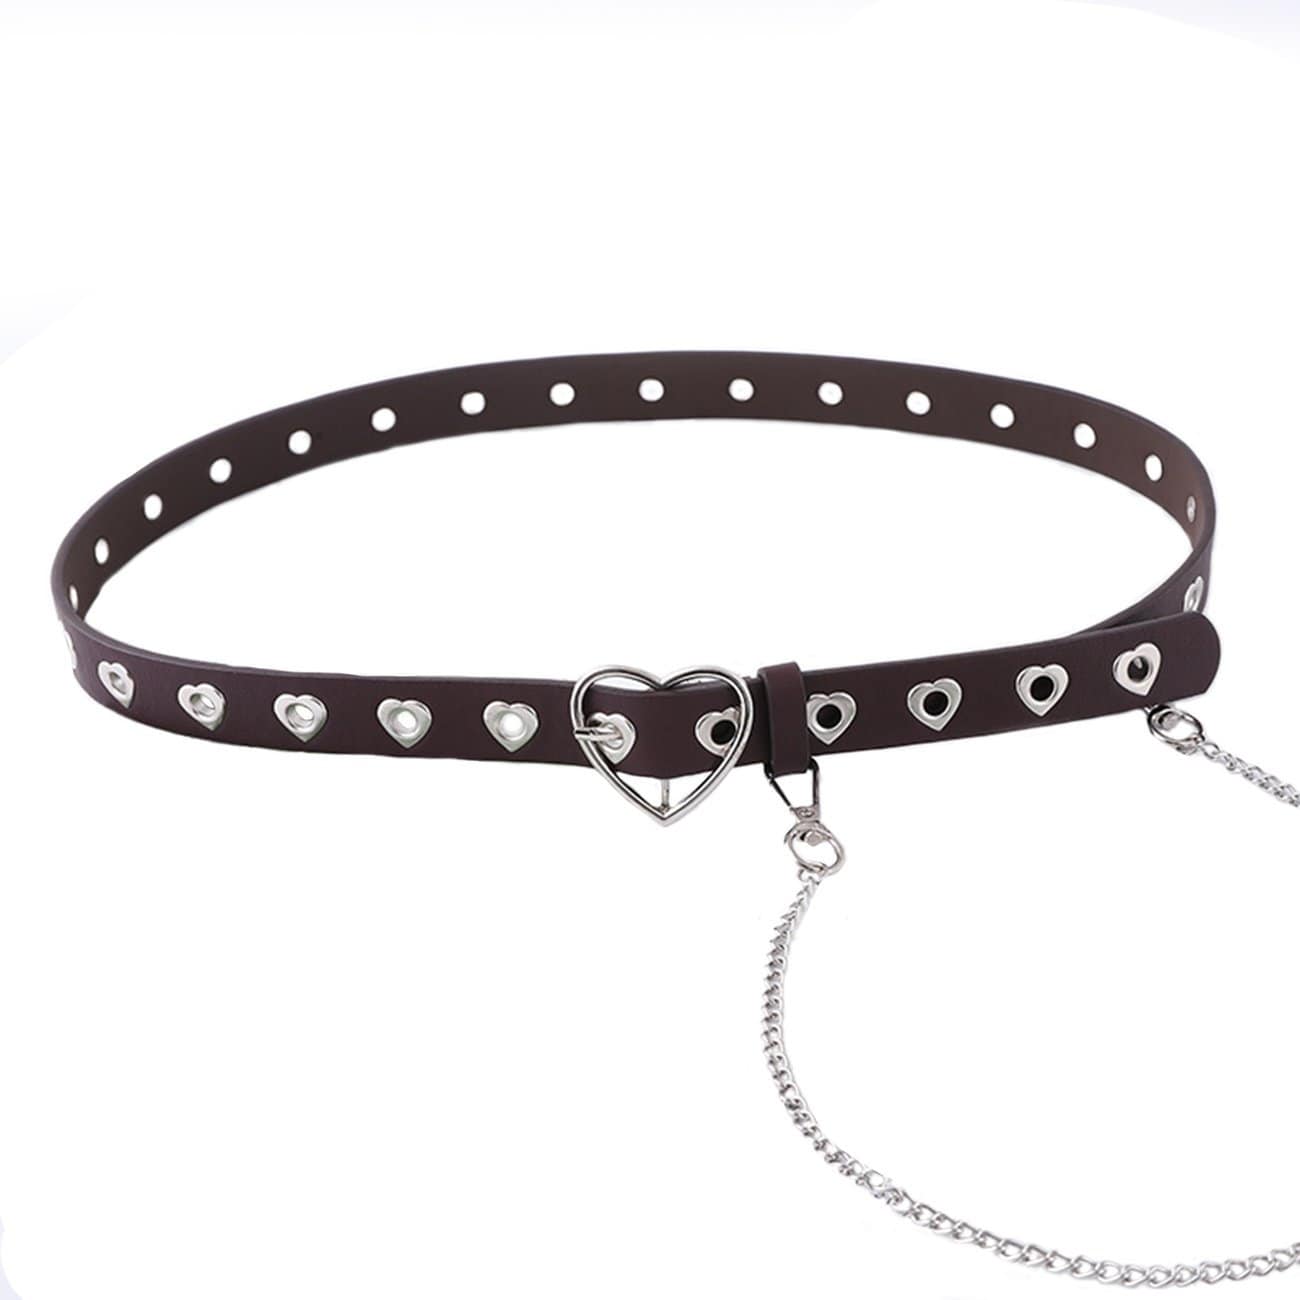 TO Punk Love Heart Hollow Out Chain Belt